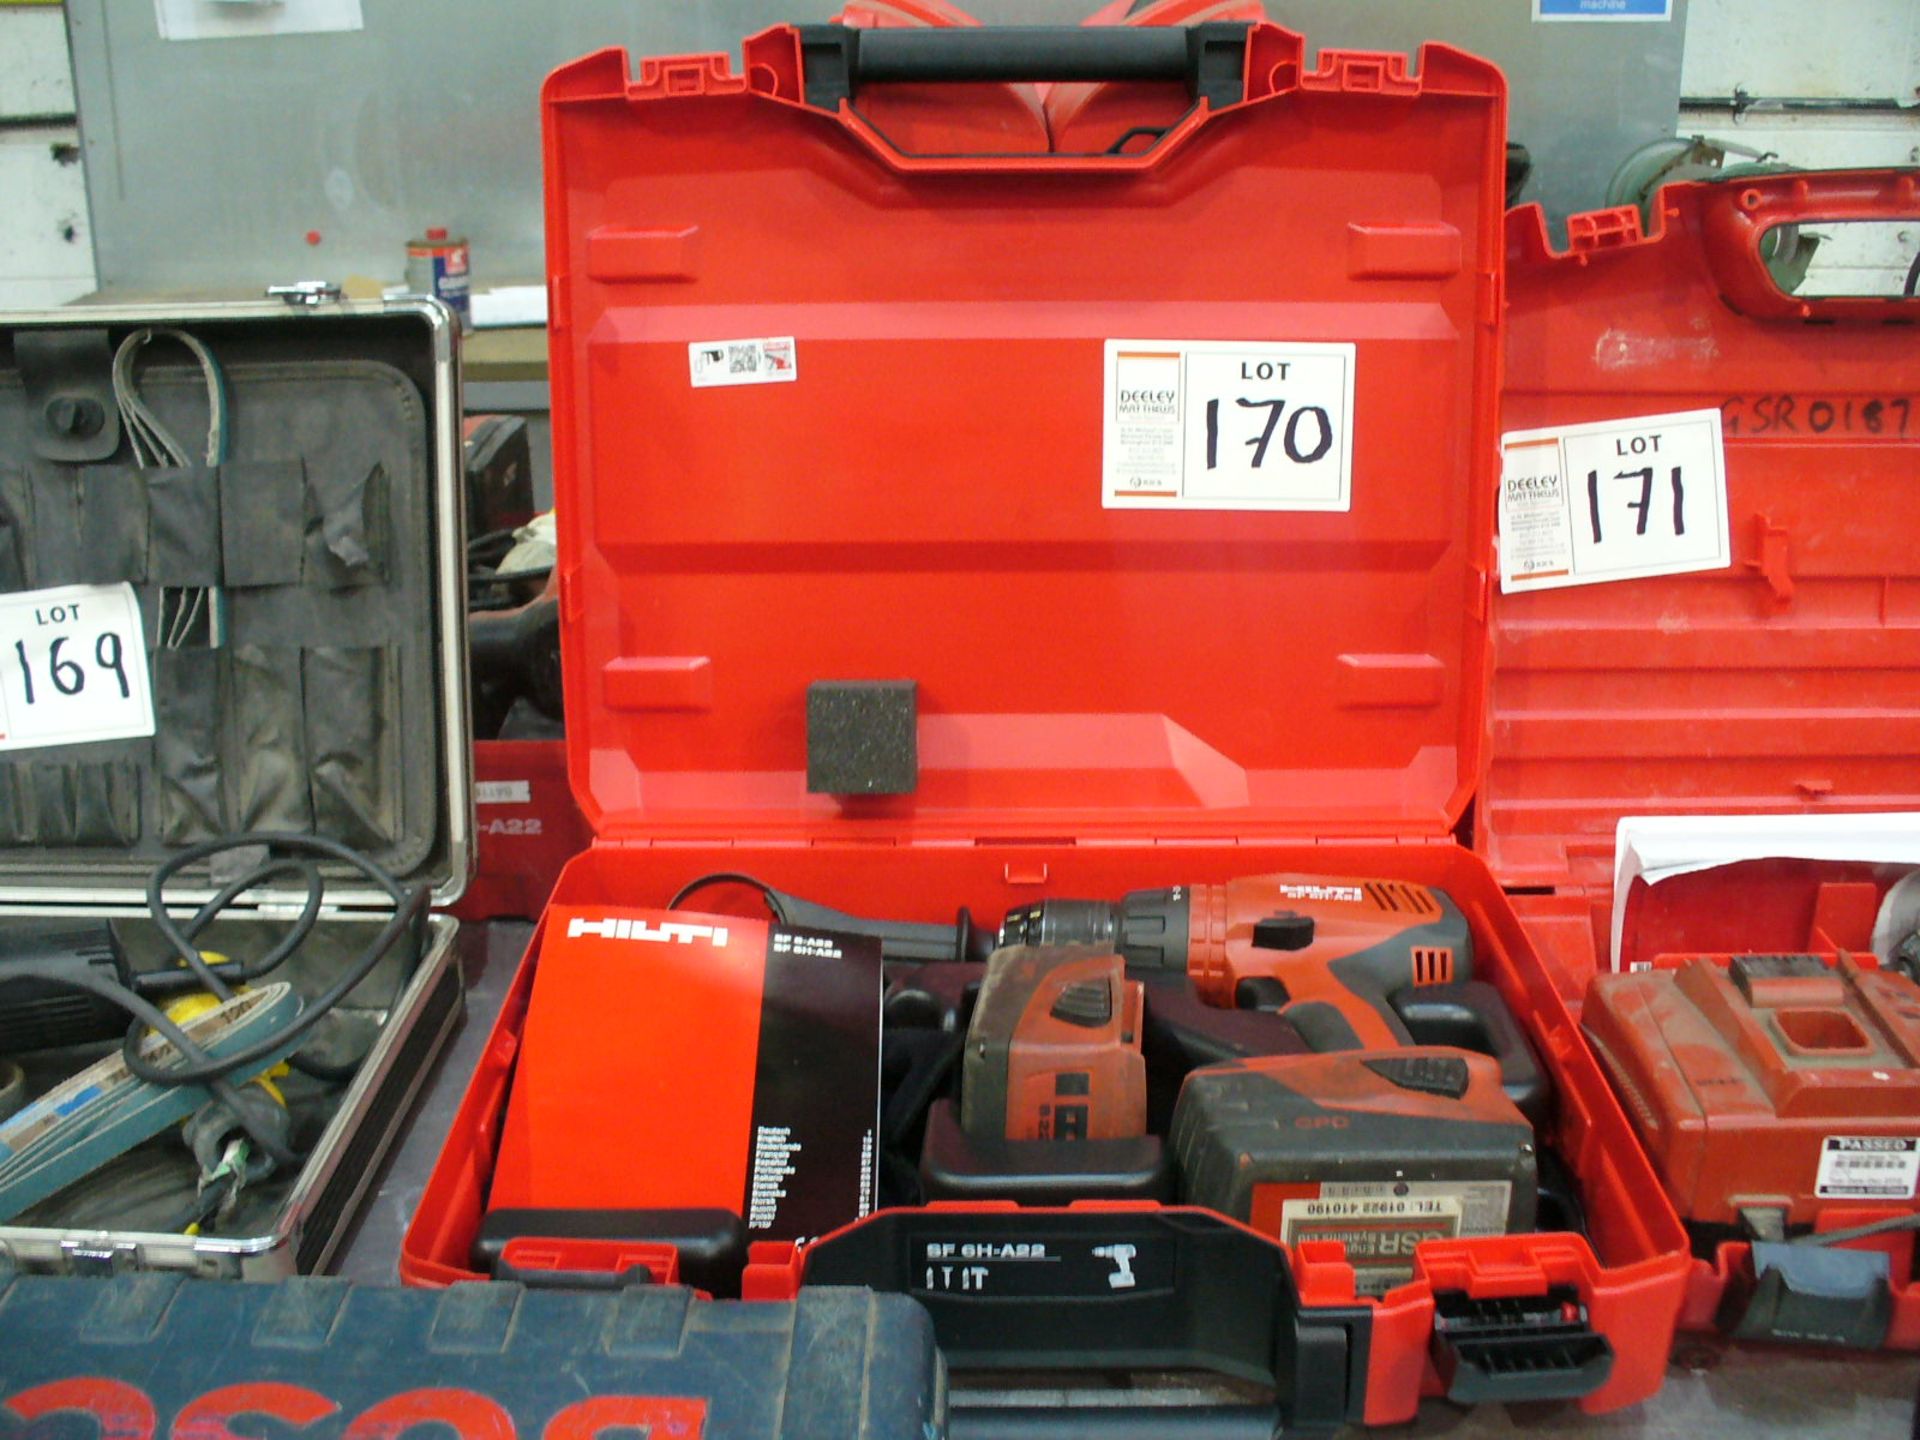 Hilti SF-6H-A22 battery DRILL, 2 x batteries B22/5.2 (no charger)